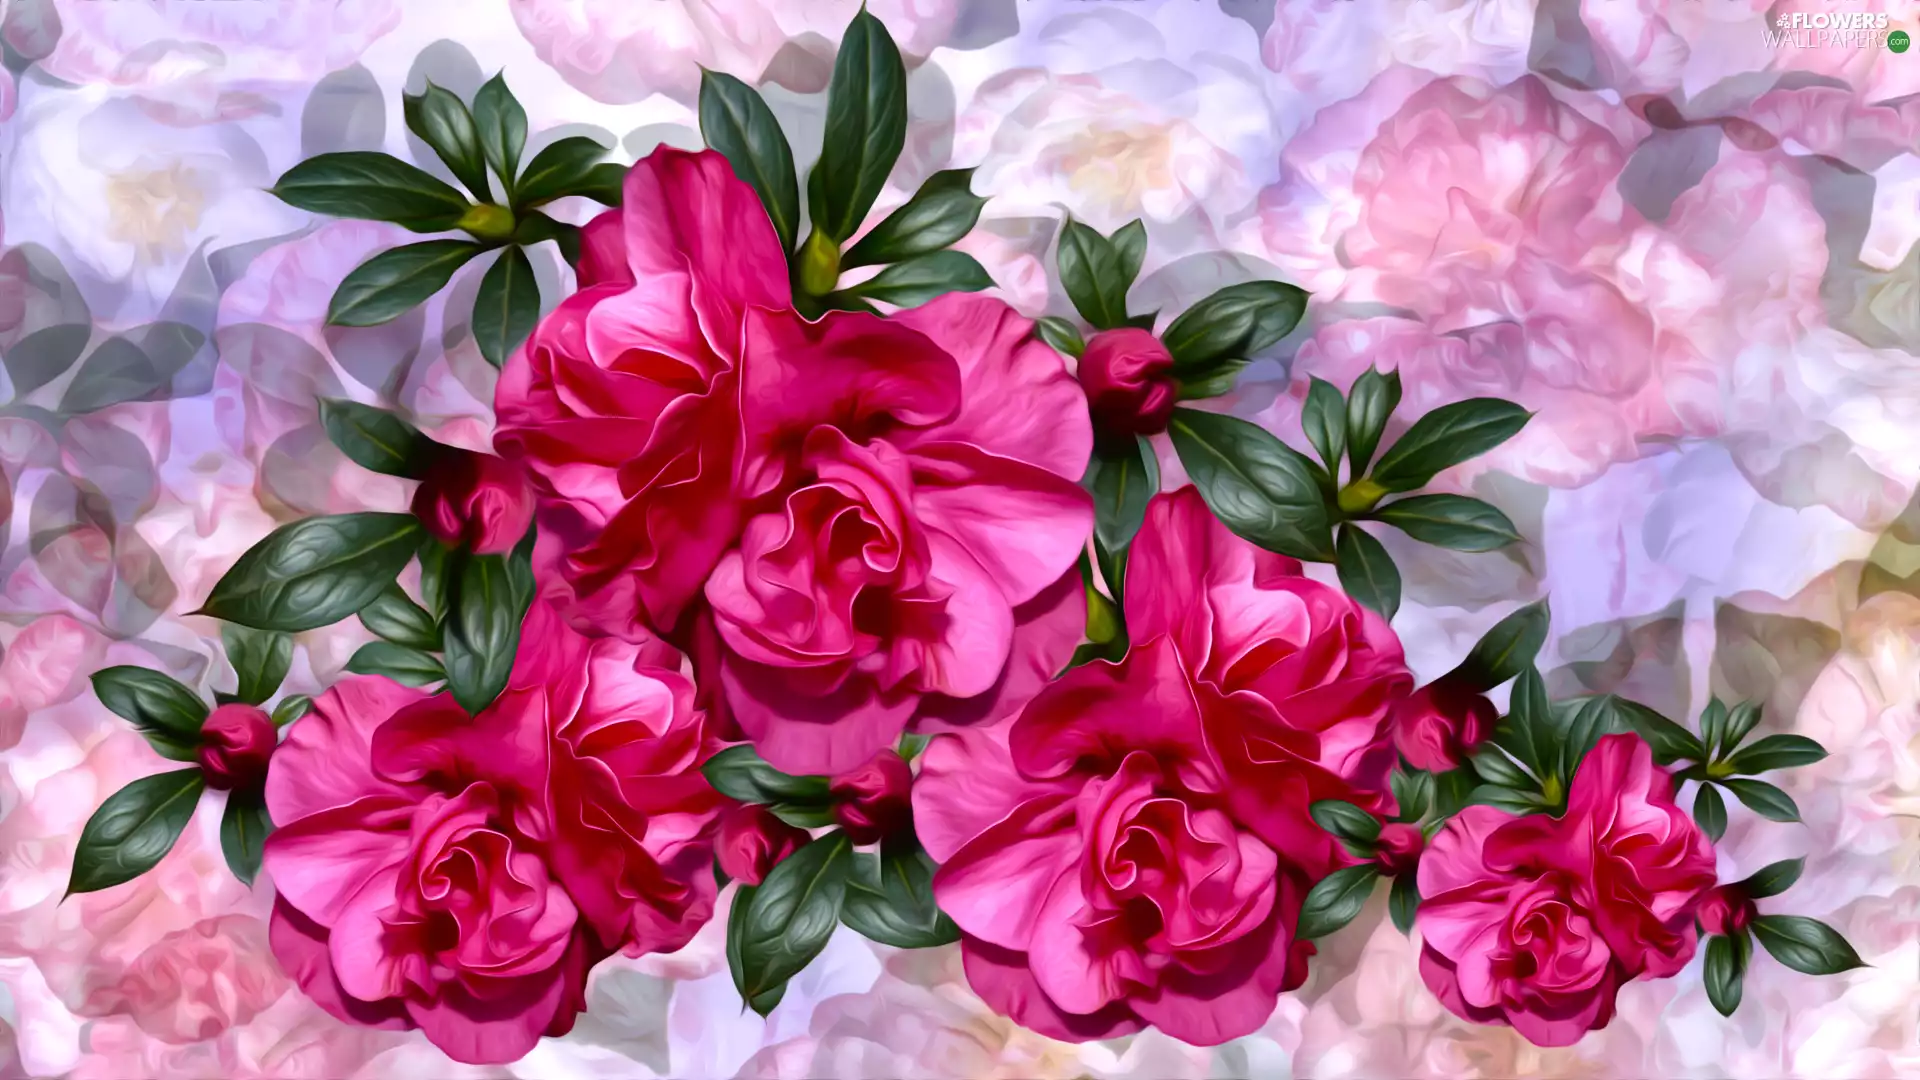 Flowers, Colorful Background, graphics, Camellias - Flowers wallpapers ...